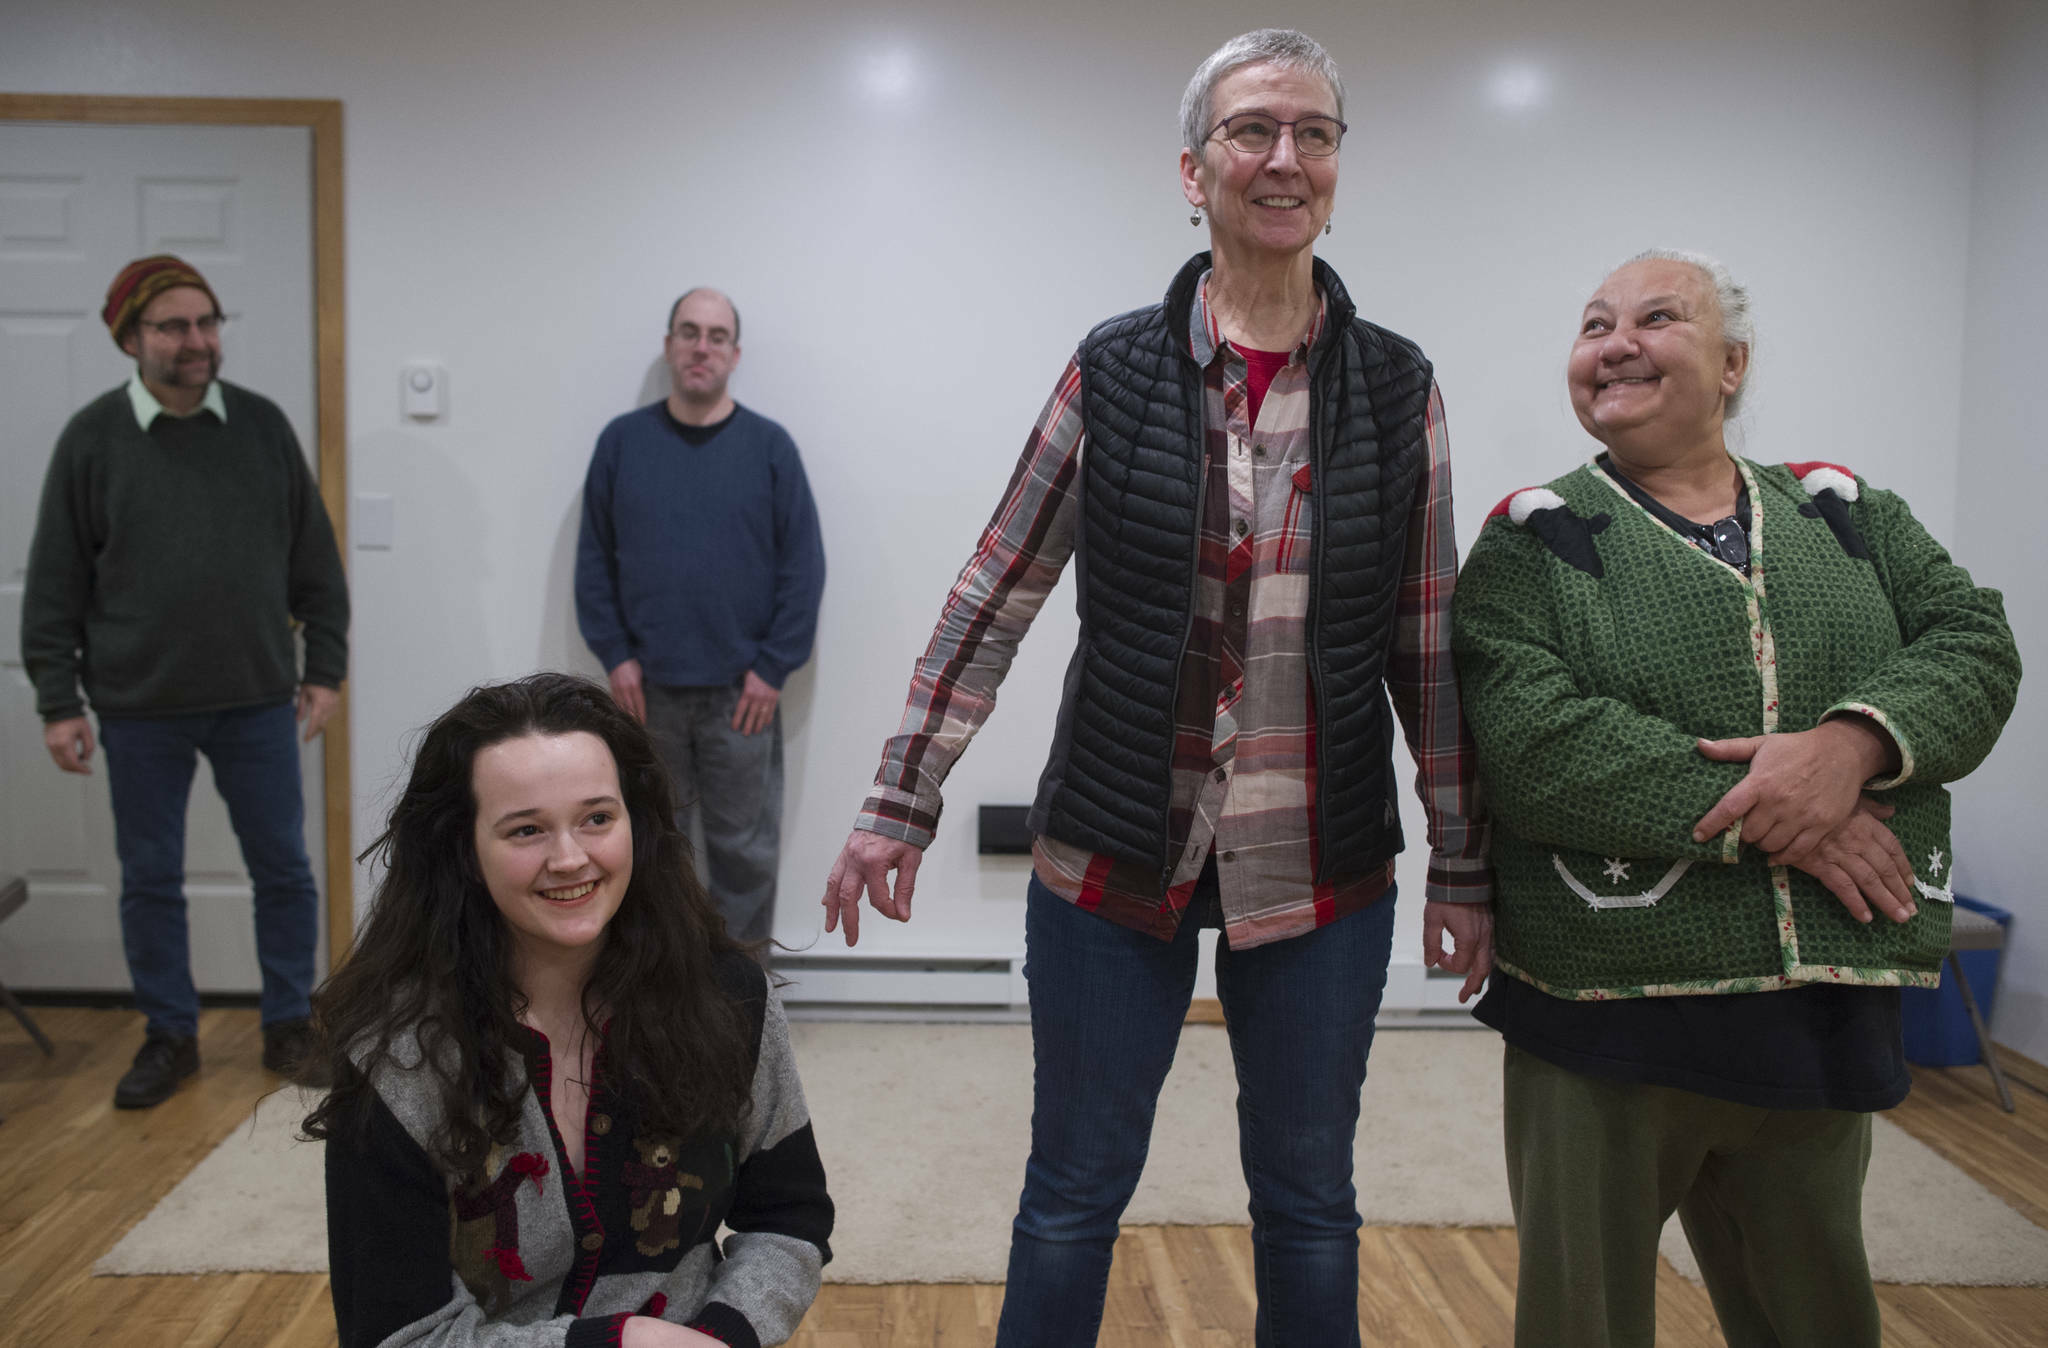 Rhoda Walker, right, Sharon Early, and Audrey Kohler work on their improvisation as Mike Christenson, left, and Seth Caron prepare to enter during a rehearsal at Christenson’s house on Thursday, Dec. 21, 2017. Kohler, now a Seattle resident, is returning as part of a nine-person group to perform an improv comedy show at Crystal Saloon on Friday. (Michael Penn / Juneau Empire File)